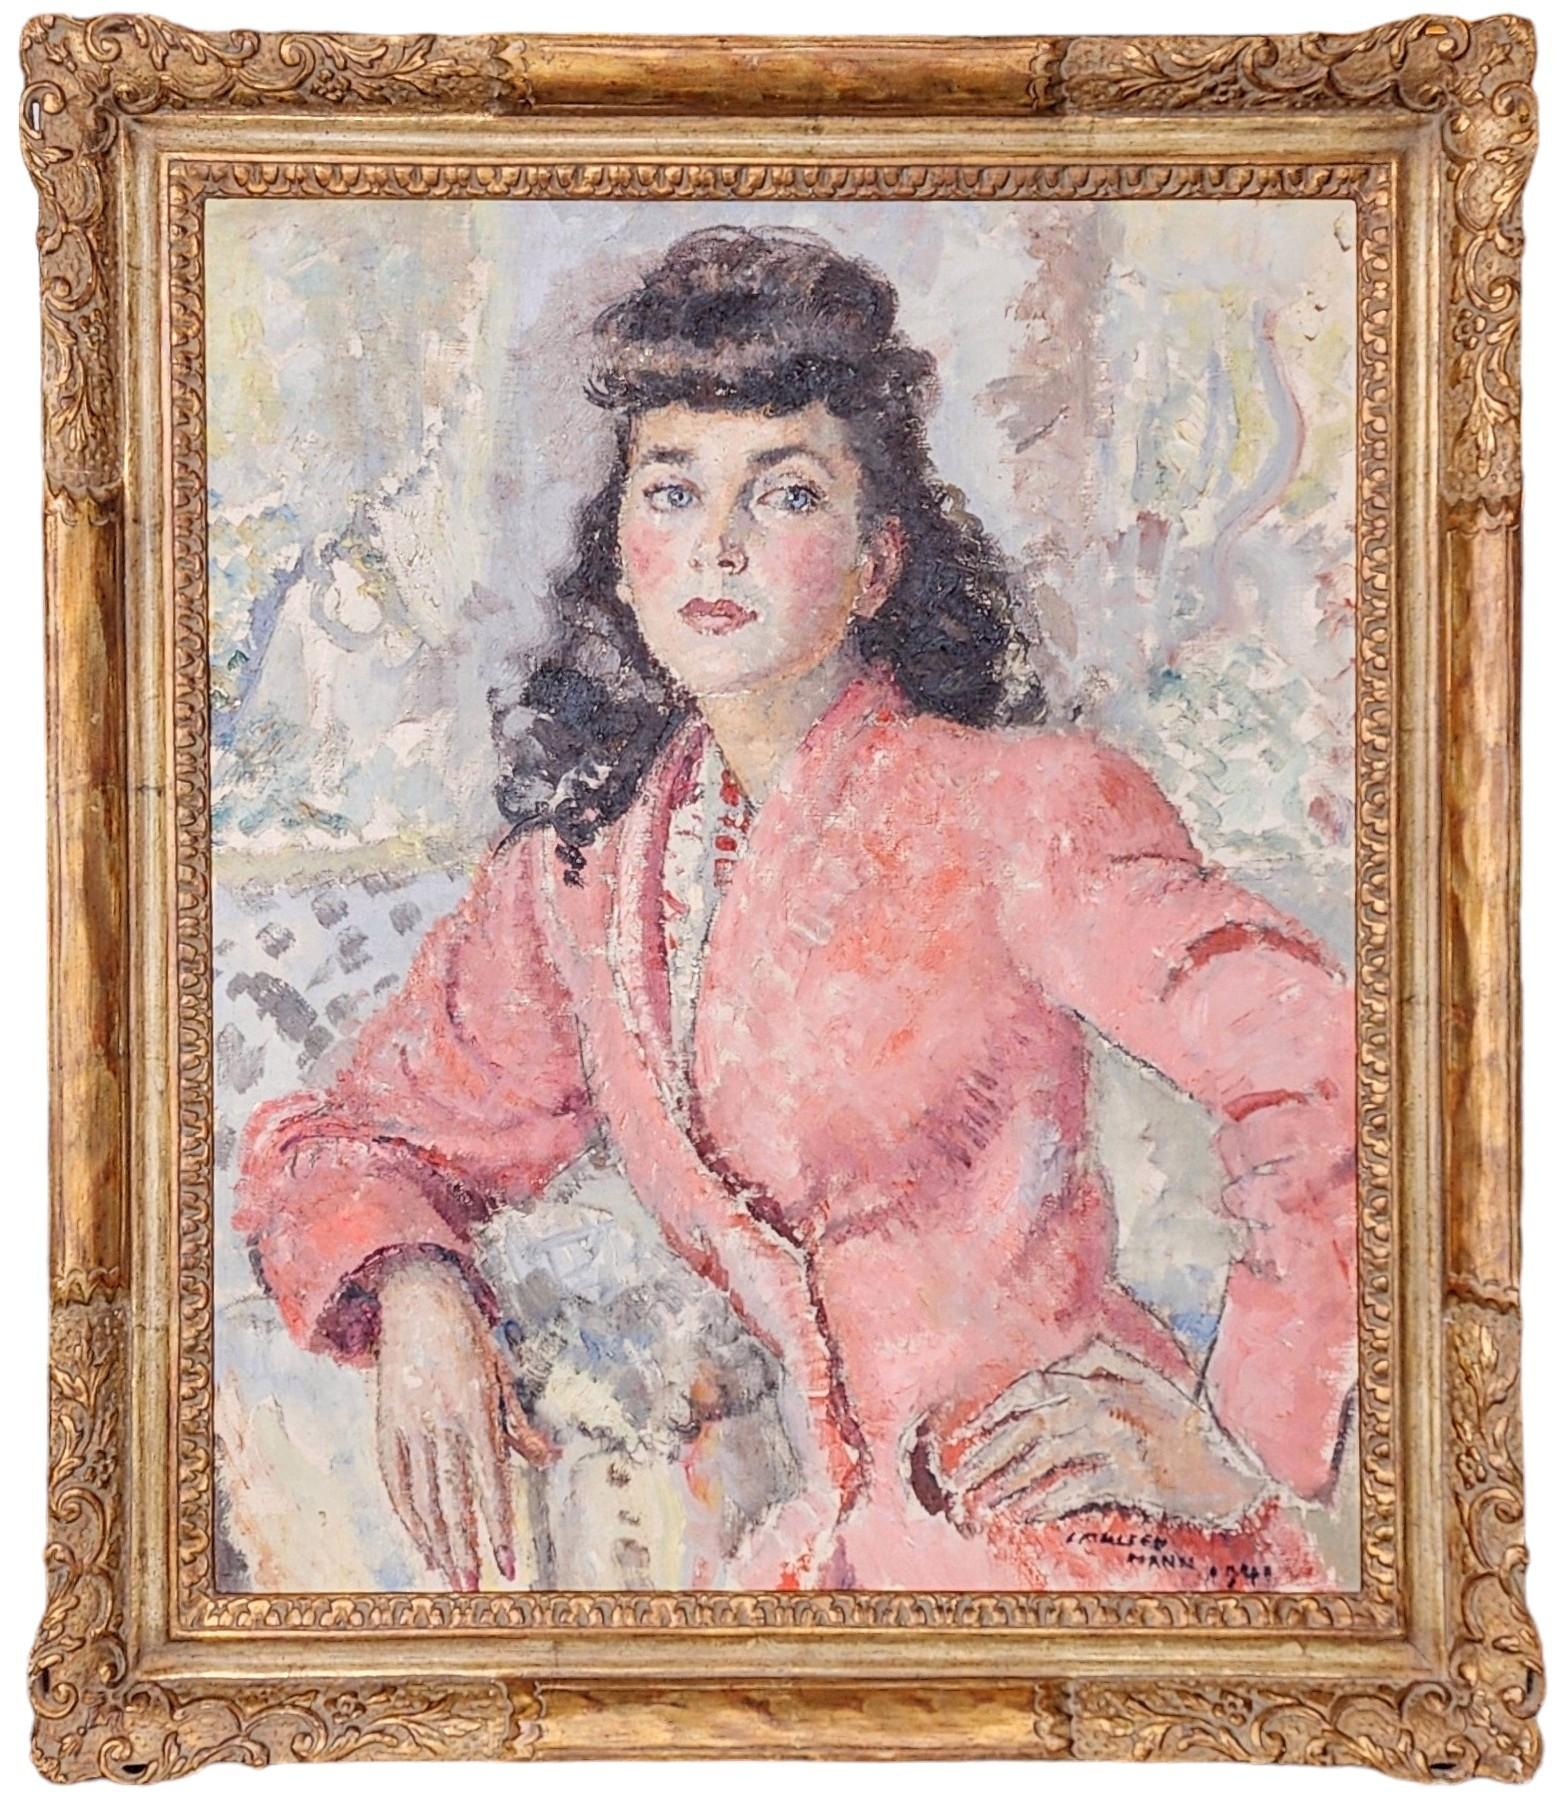 Cathleen Mann Portrait Painting - Portrait of Maureen O'Sullivan, Golden Age of Hollywood PHOTOGRAPHED W/ PAINTING